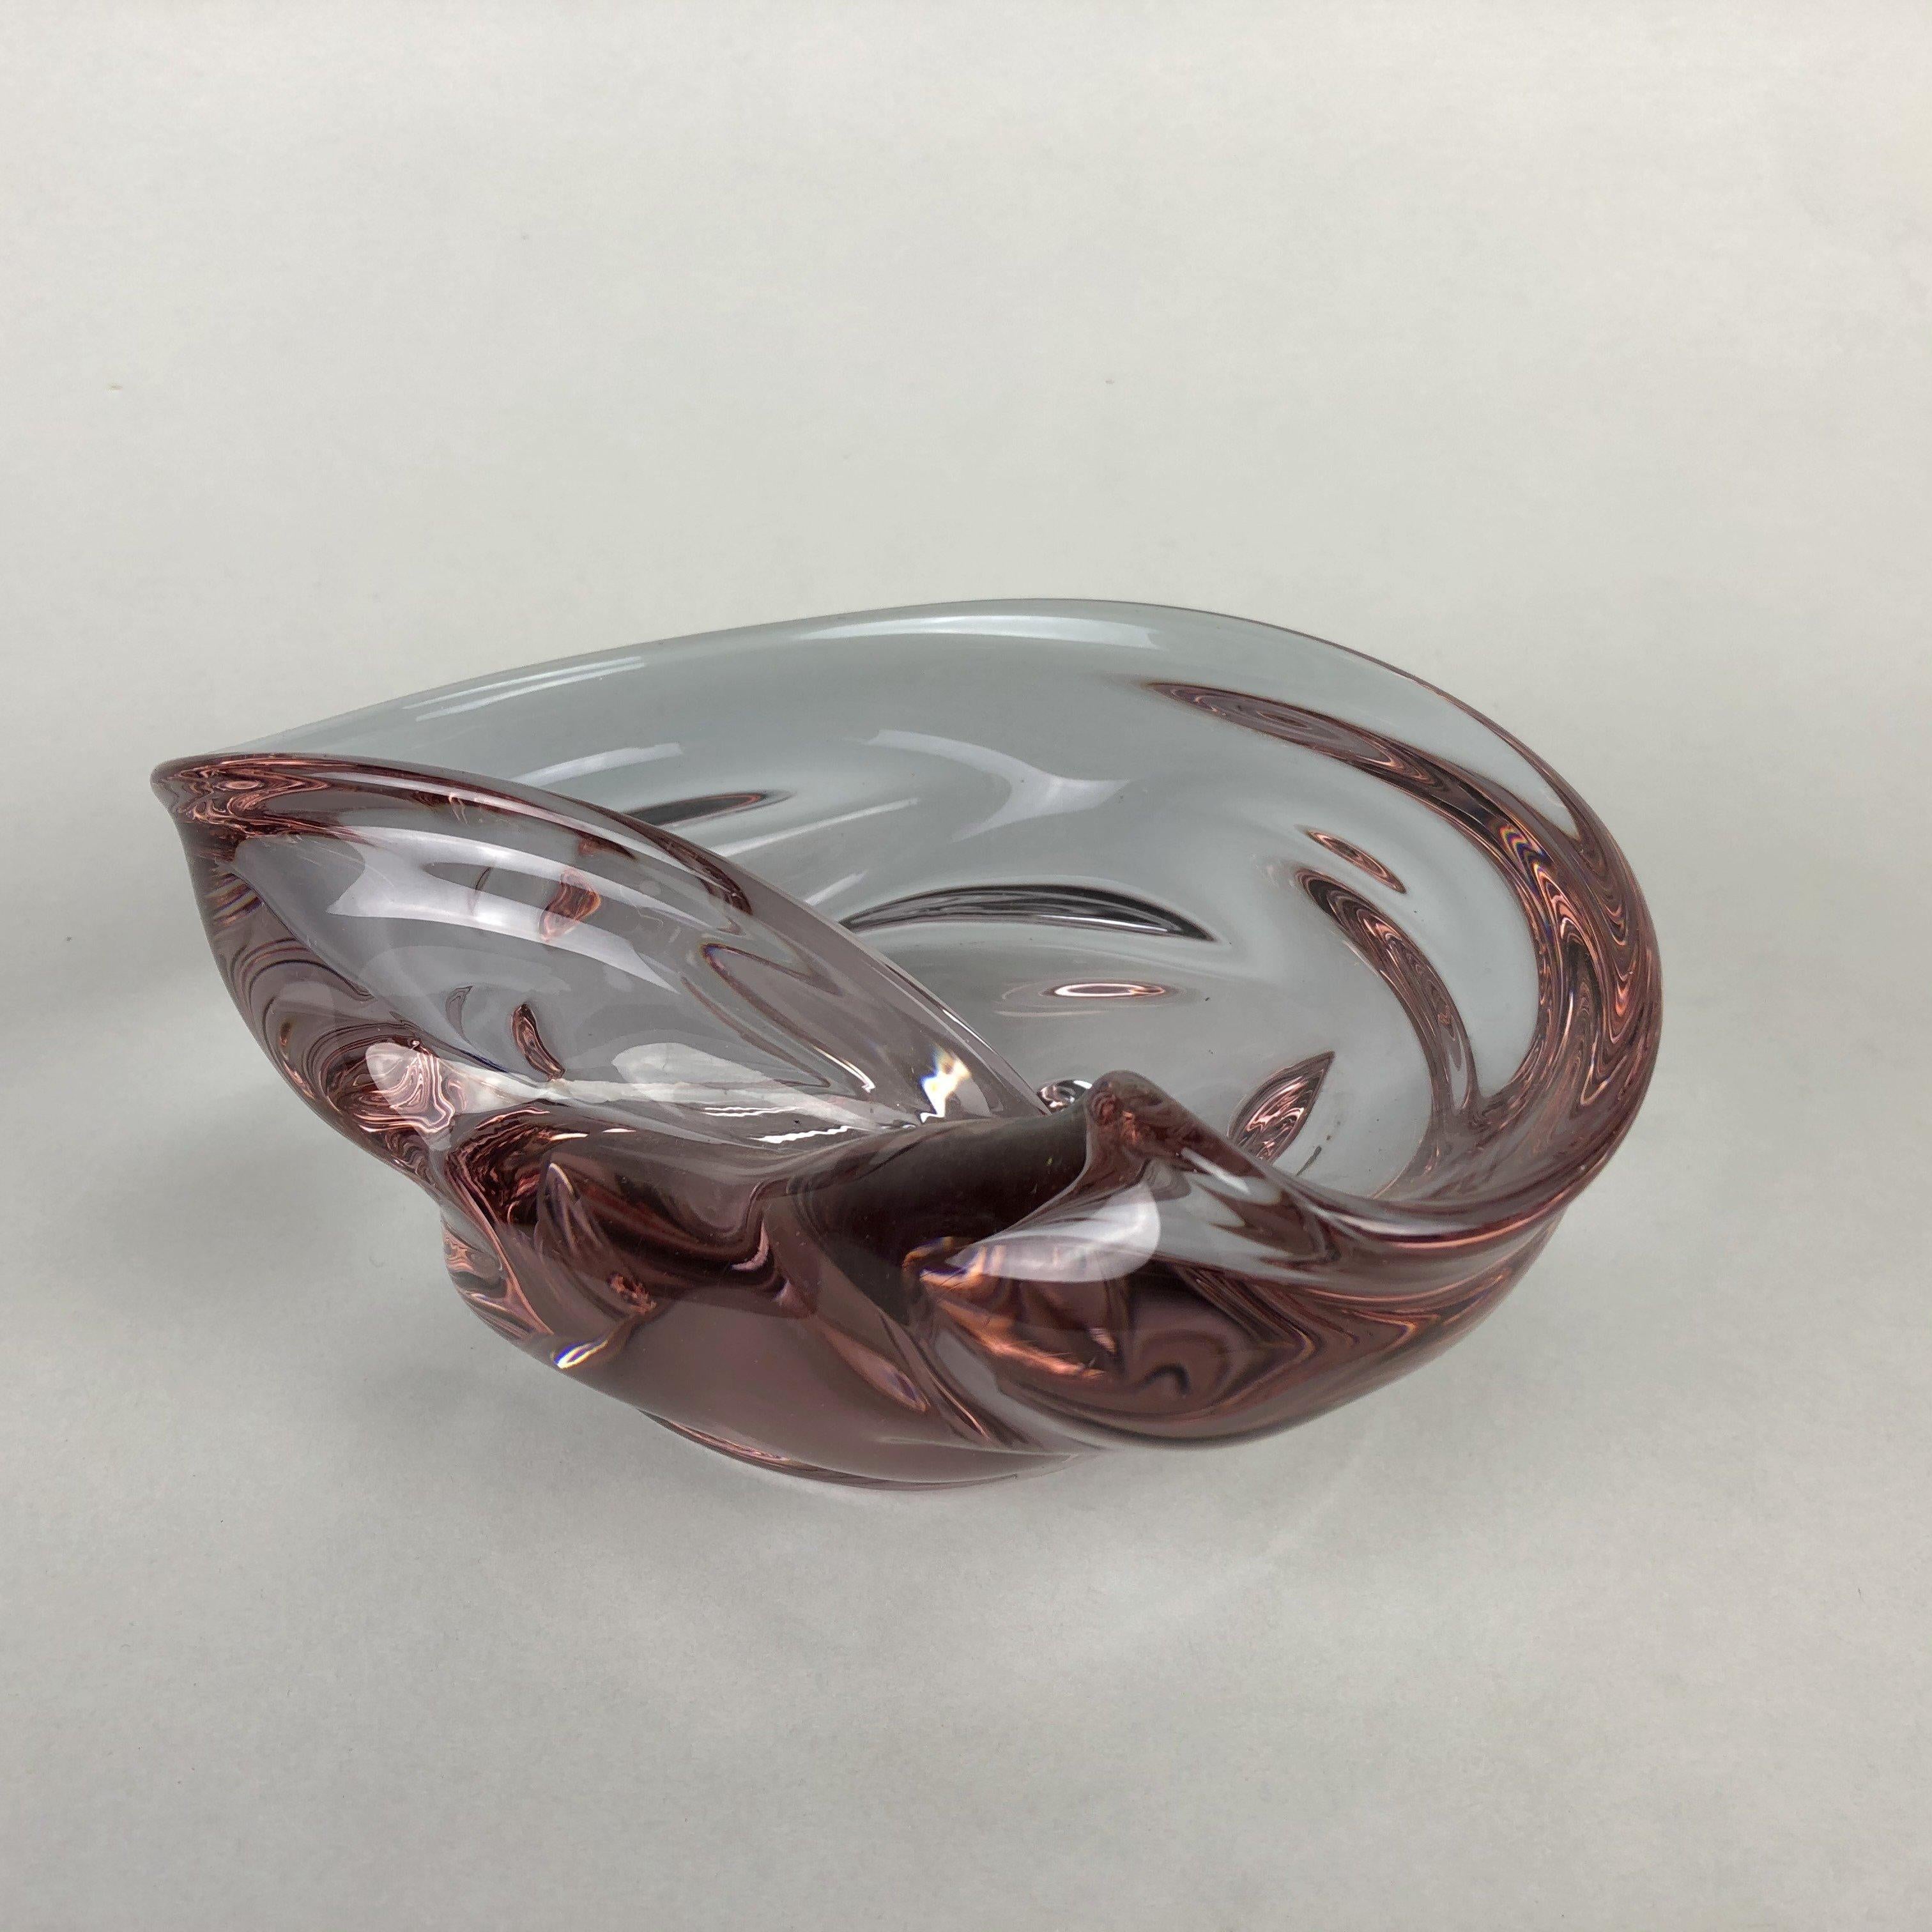 Lovely small art glass bowl from former Czechoslovakia.